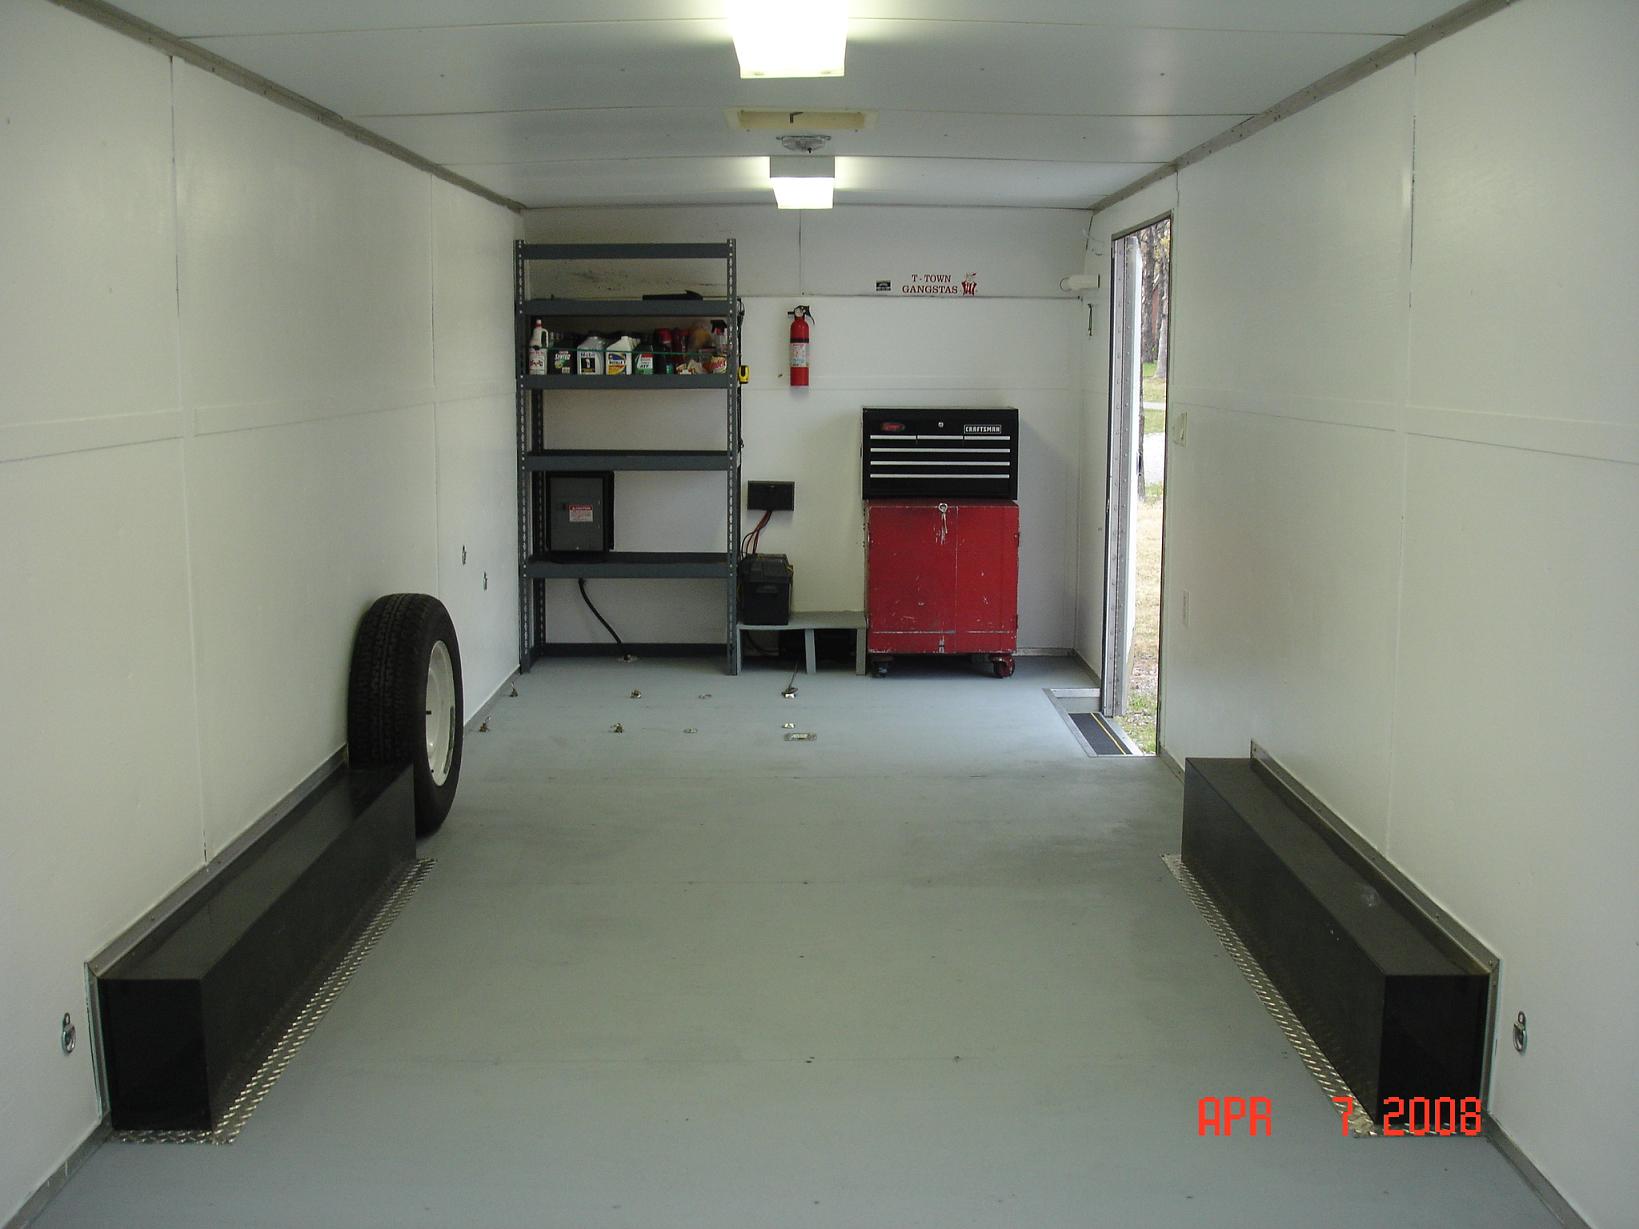 Attached picture 4975225-Inside_Trailer.JPG